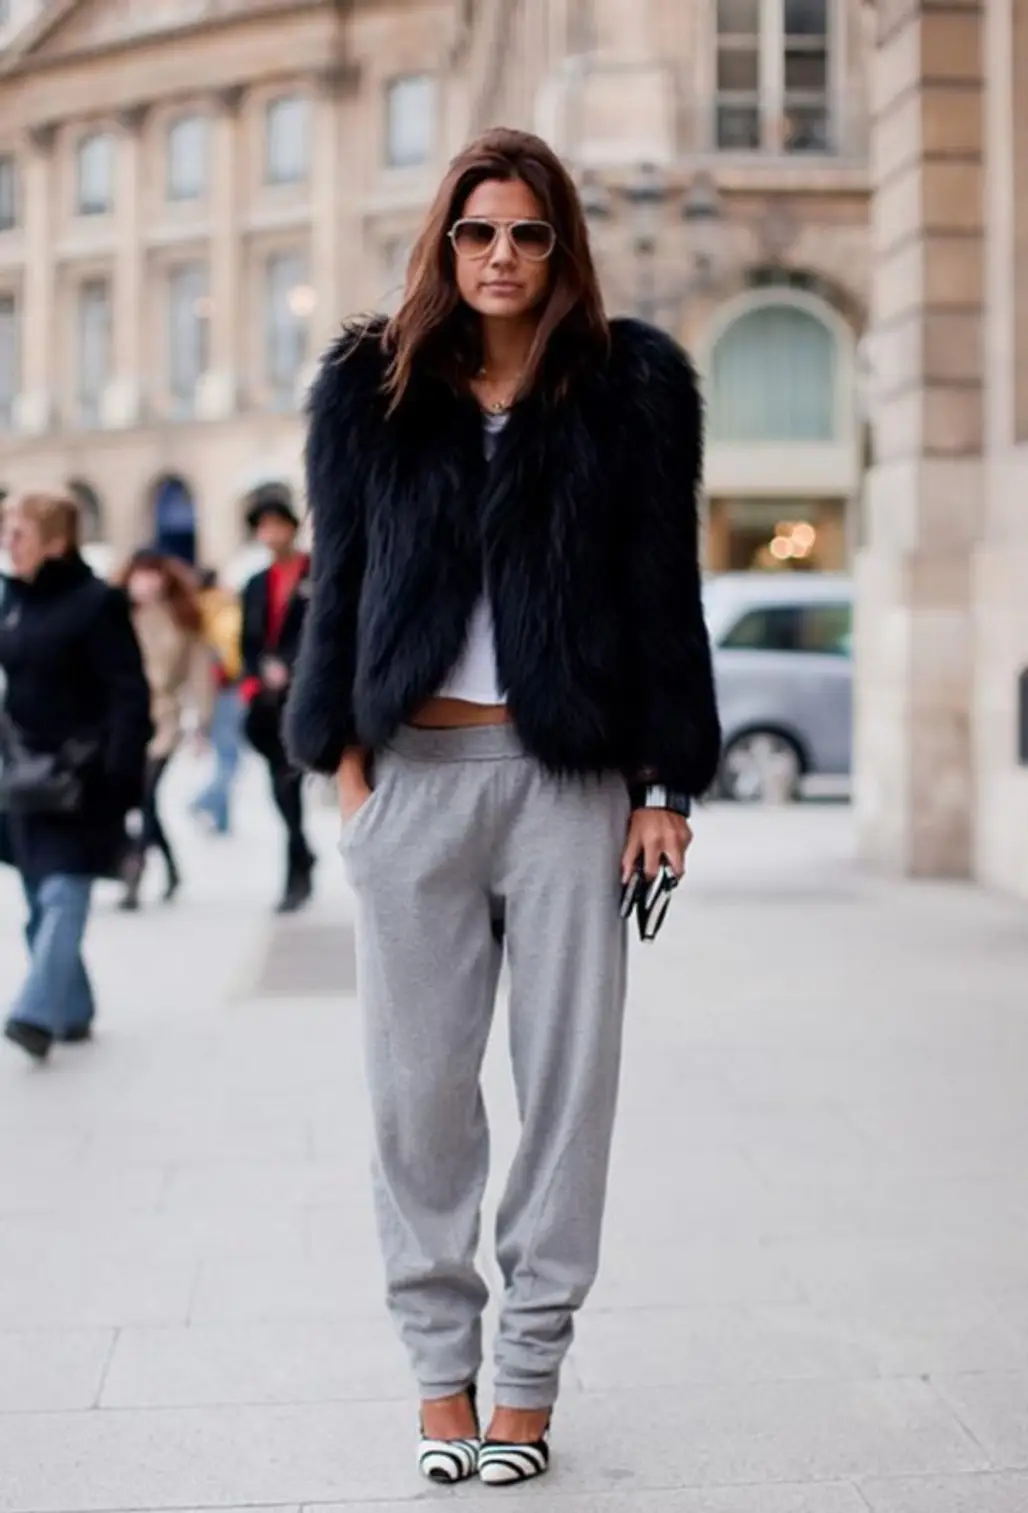 Joggers and a Statement Jacket